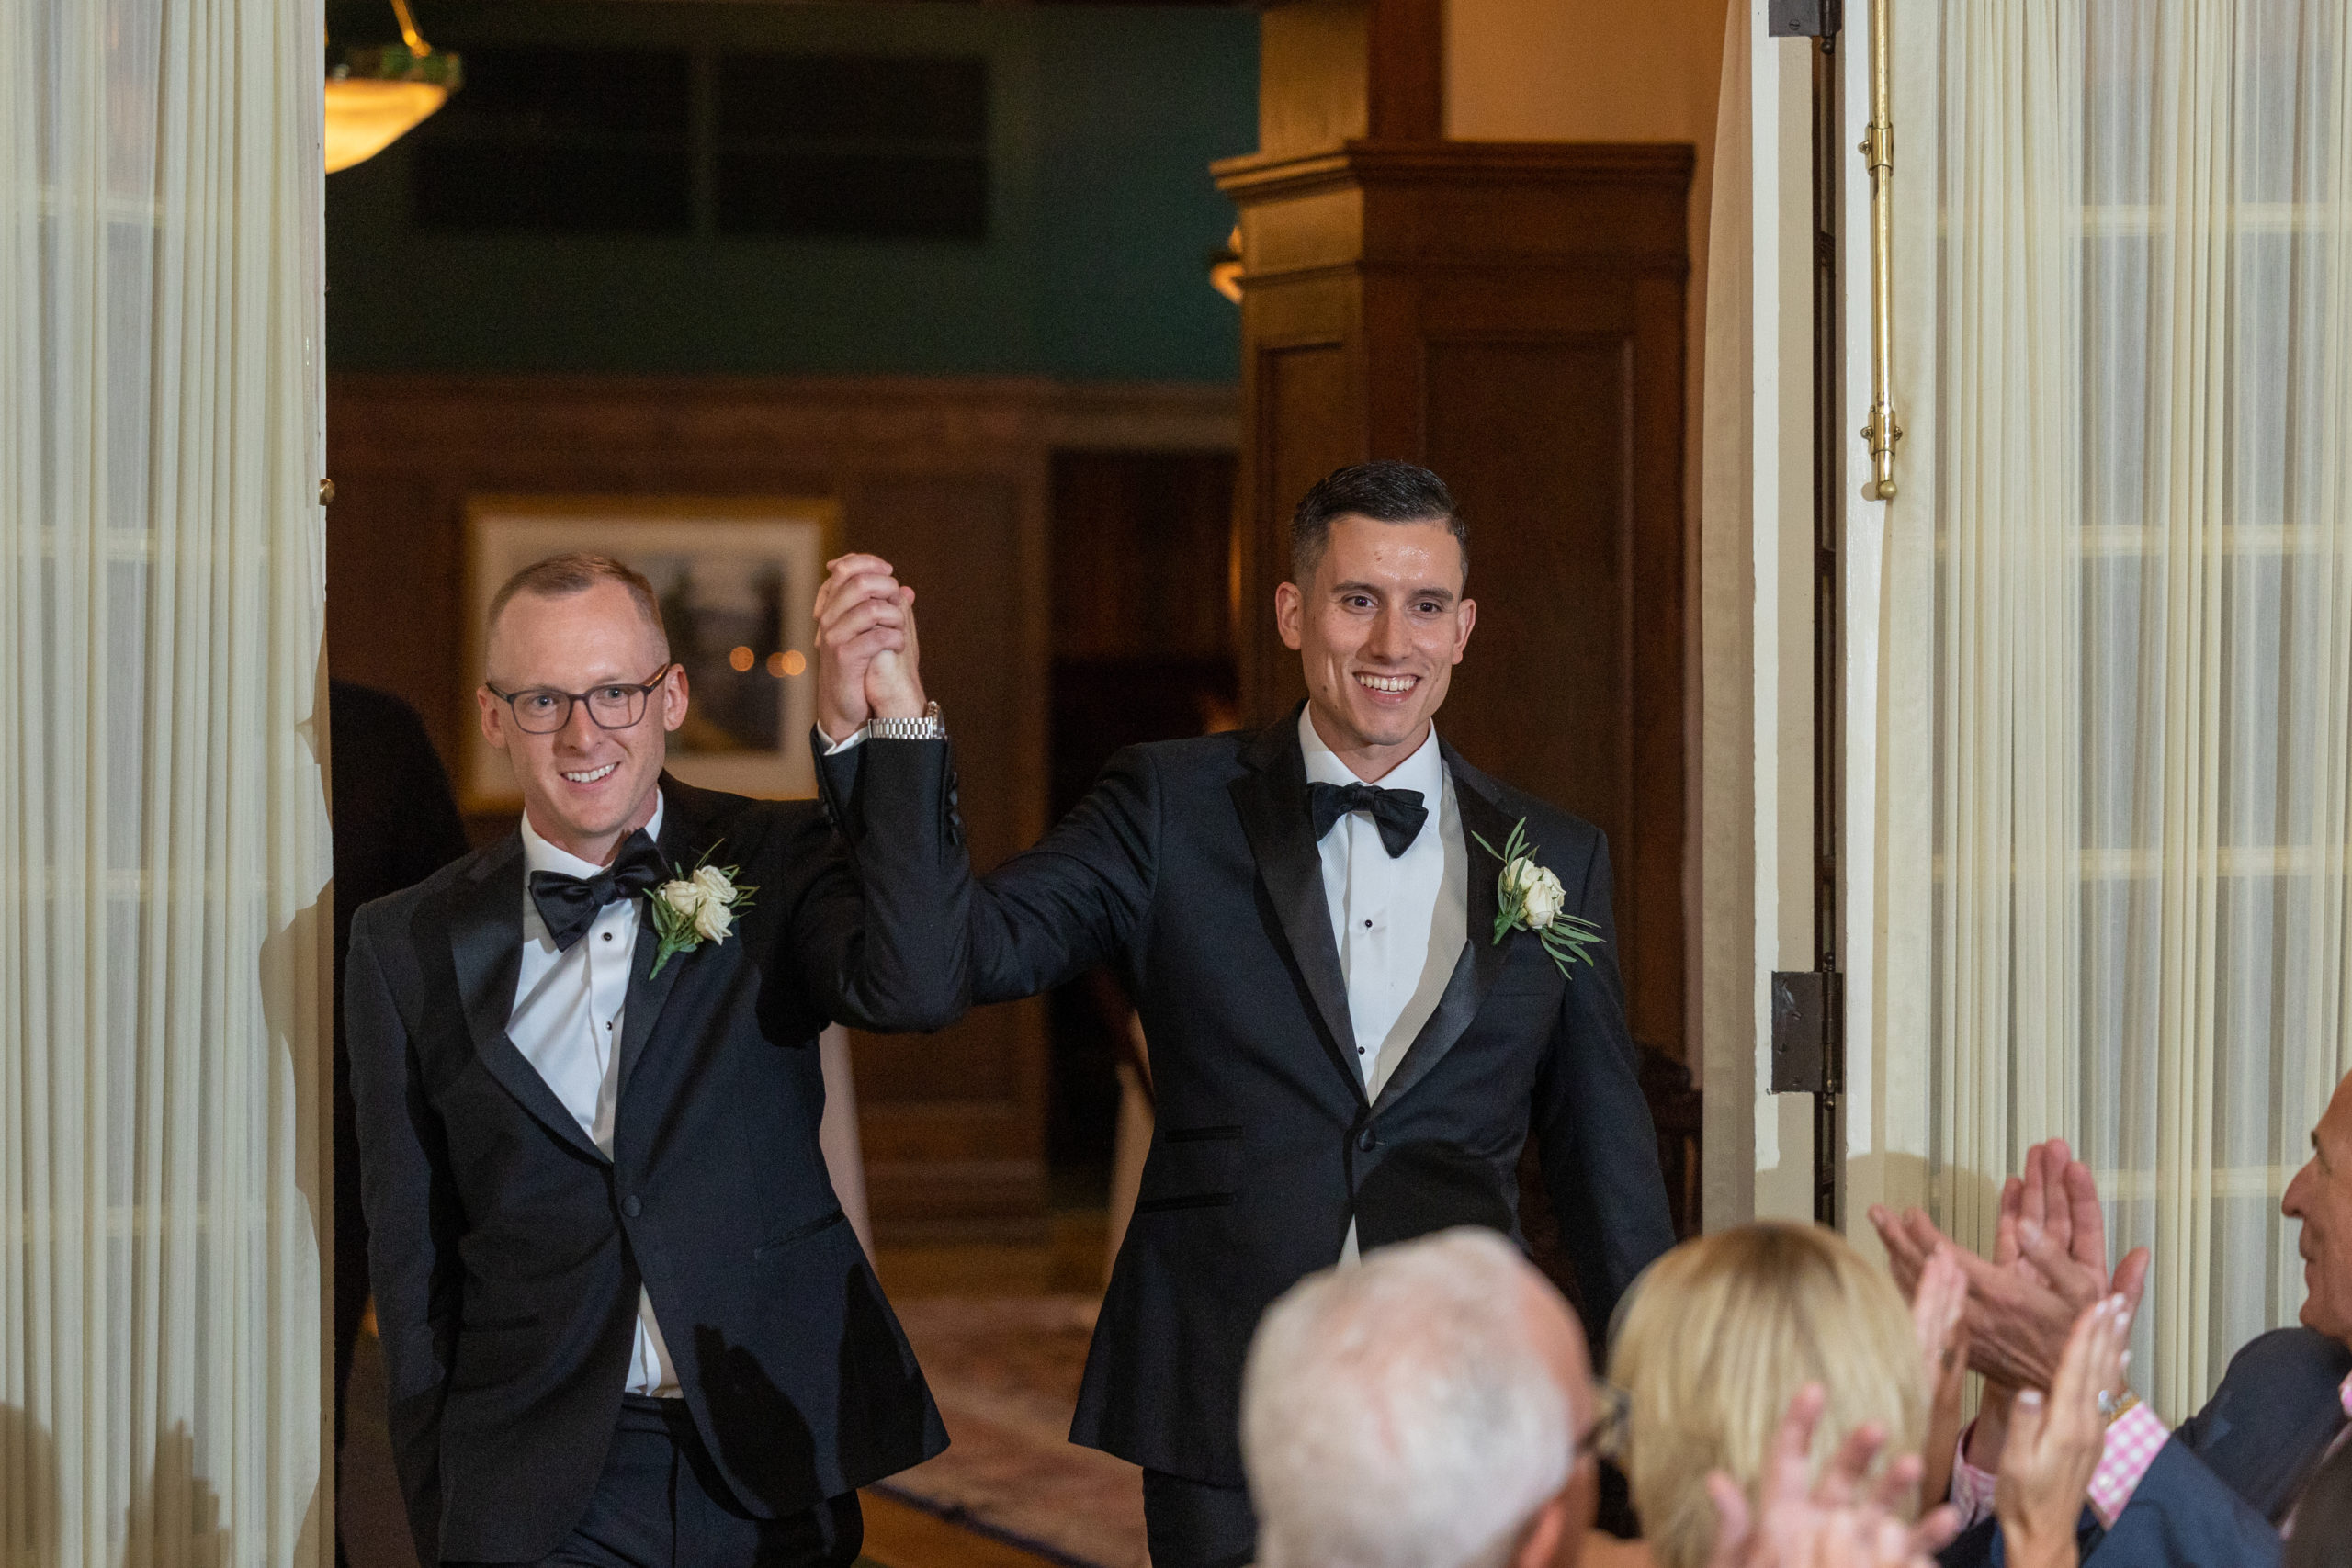 groom and groom introduced as newlyweds at the Westmoreland Club in Wilkes-Barre, PA